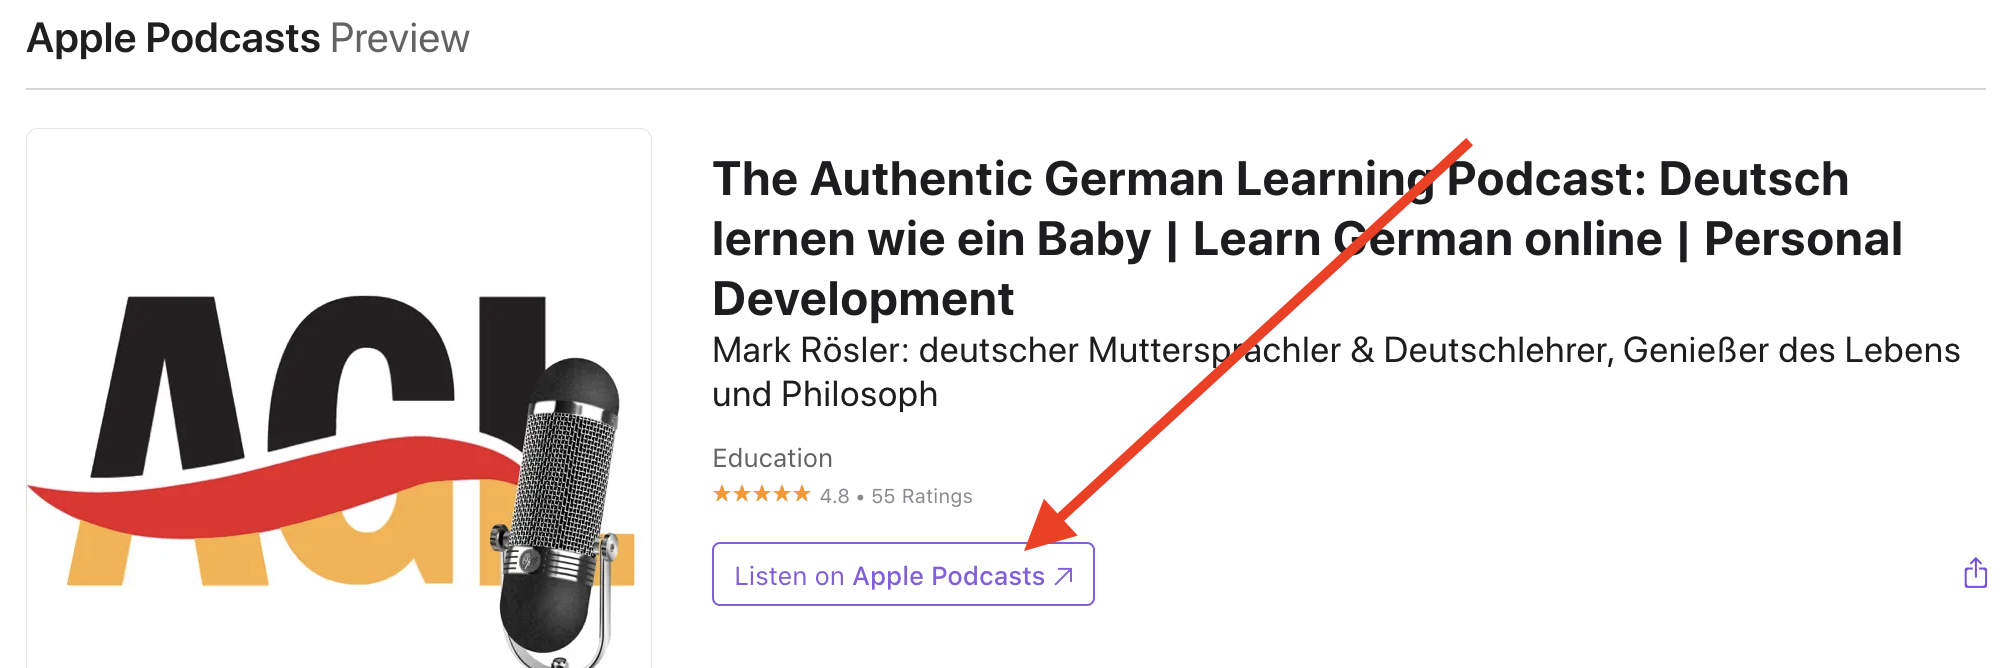 Opening the authentic german learning podcast on apple podcasts